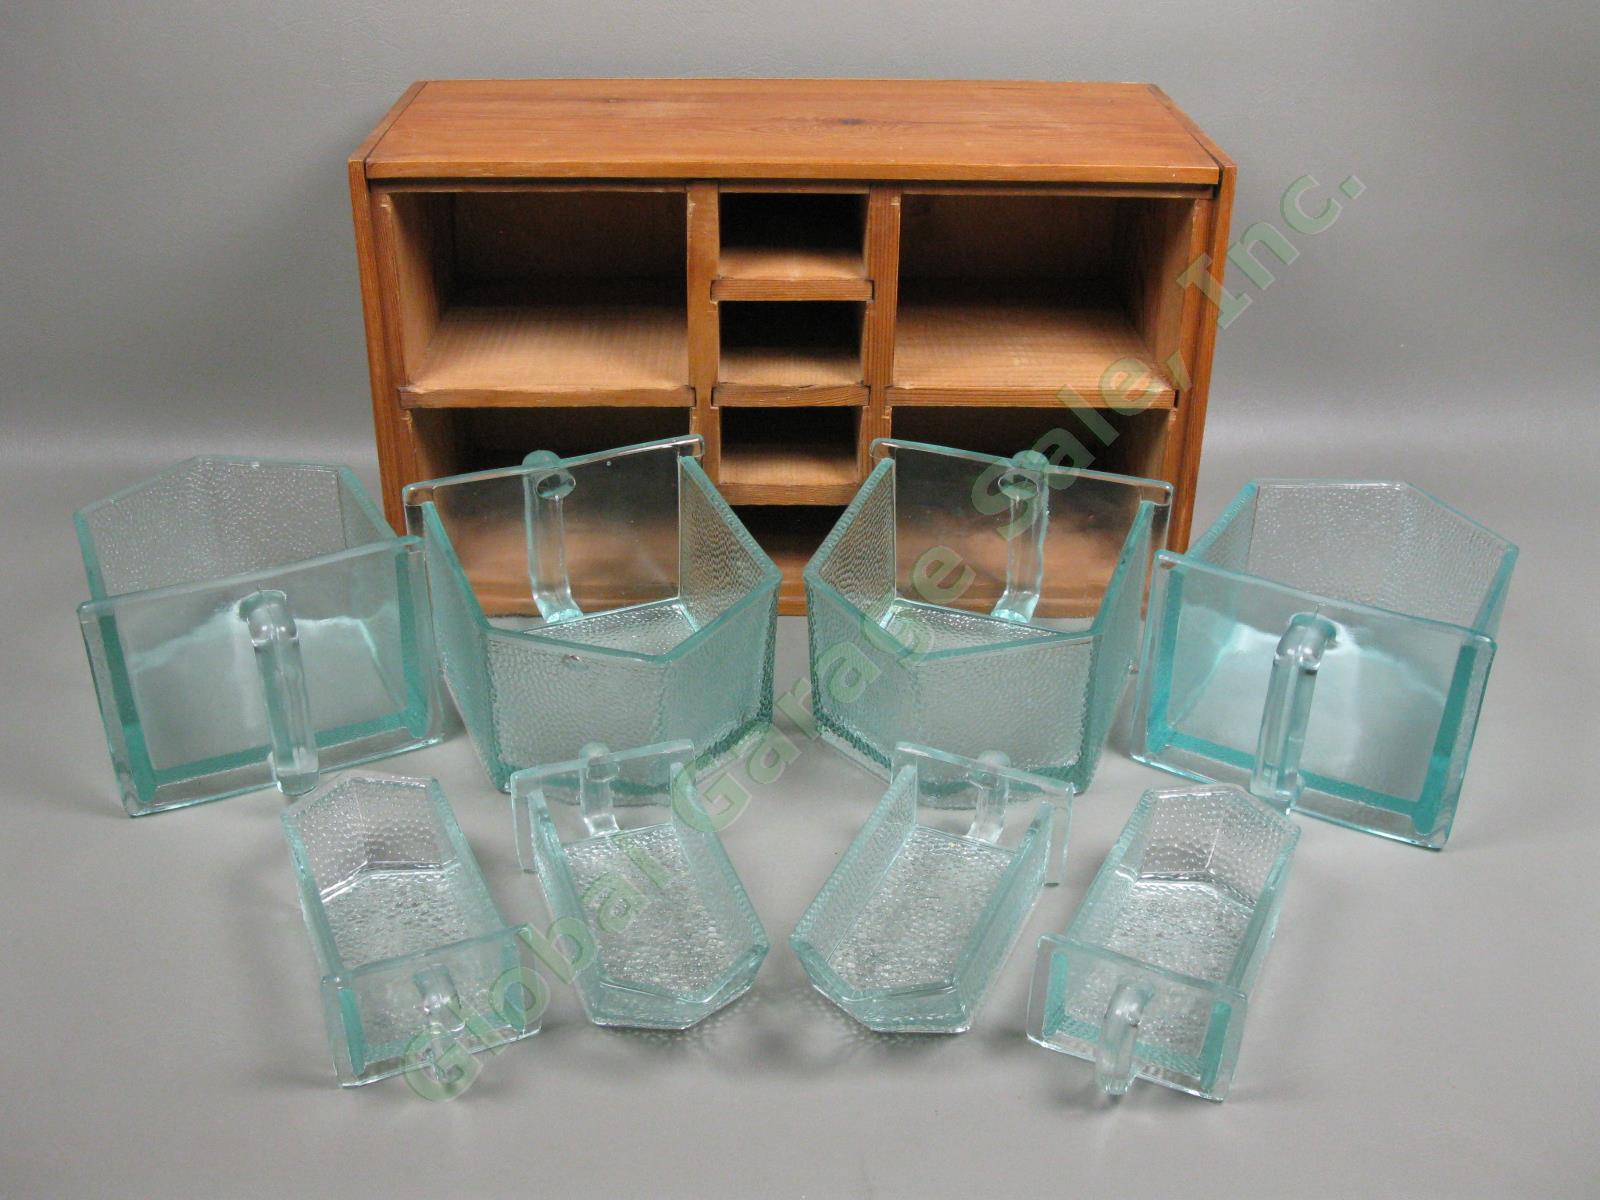 Vintage Hoosier Wooden Spice/Apothecary Cabinet Cupboard + 8 Glass Scoop Drawers